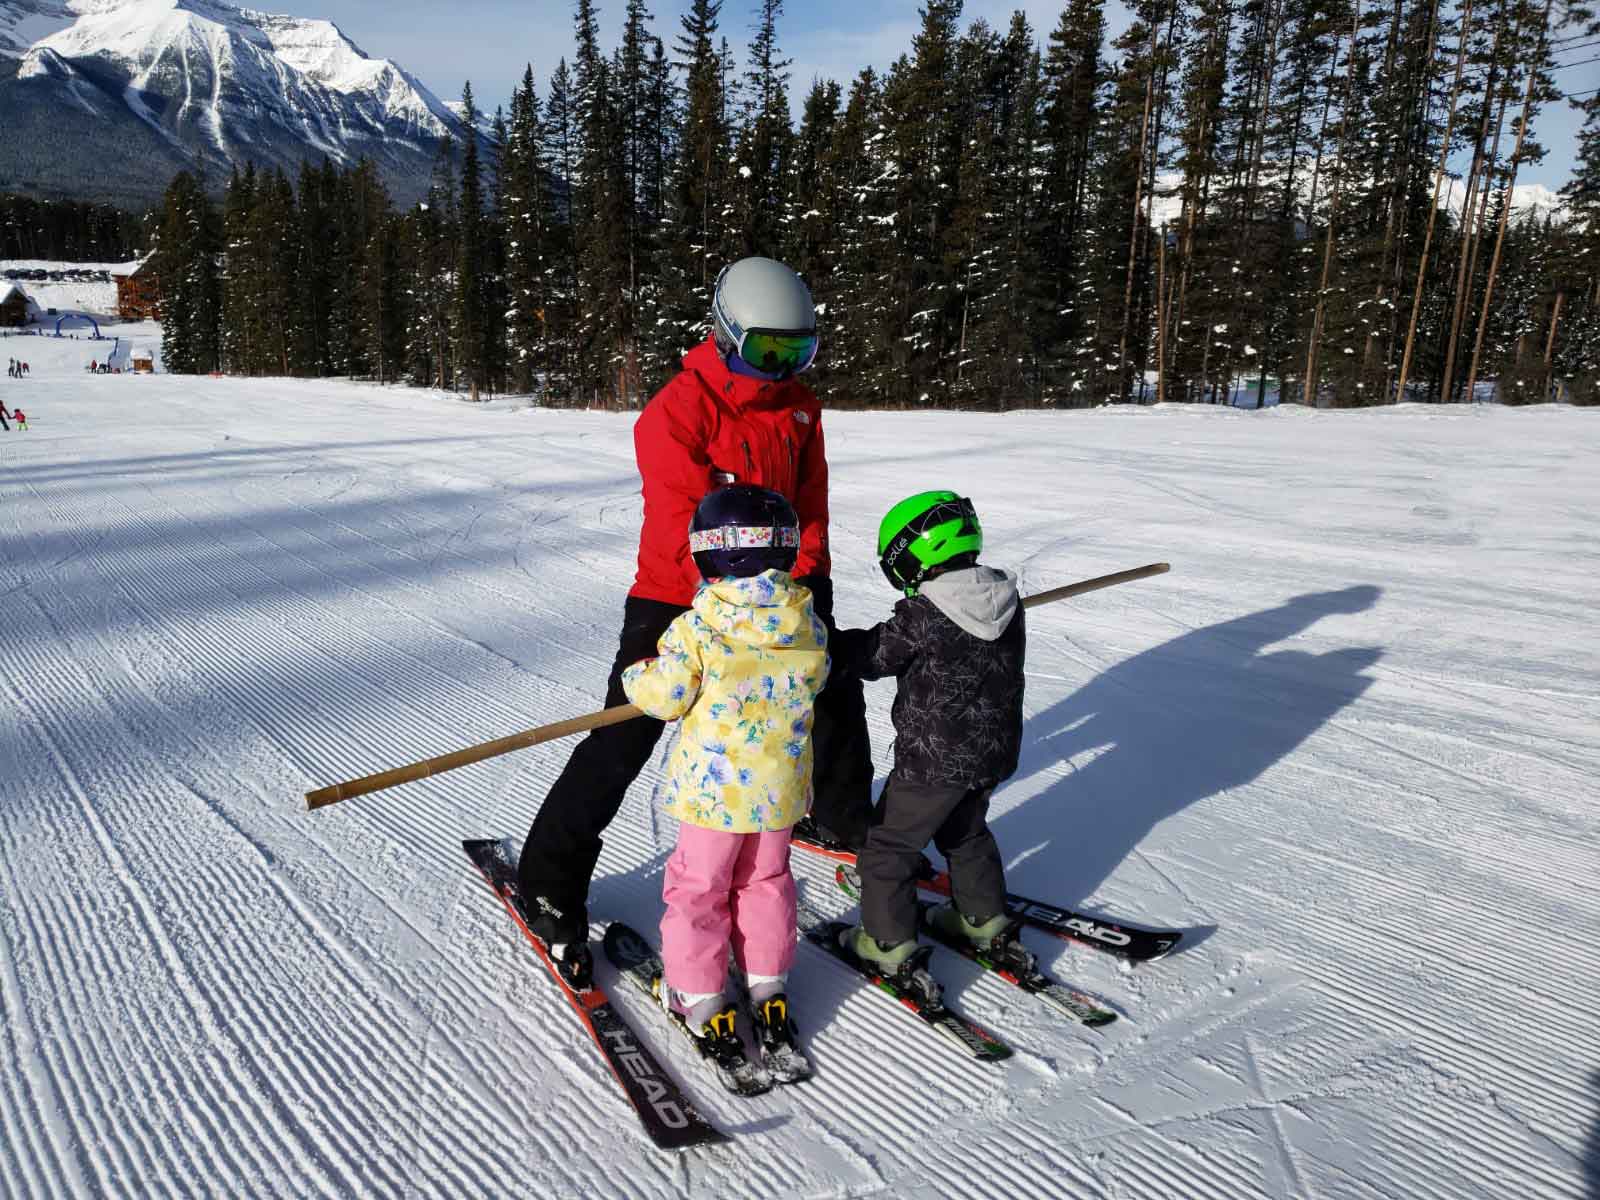 Jessica teaching the kids how to glide during their ski lesson at Lake Louise Ski Resort